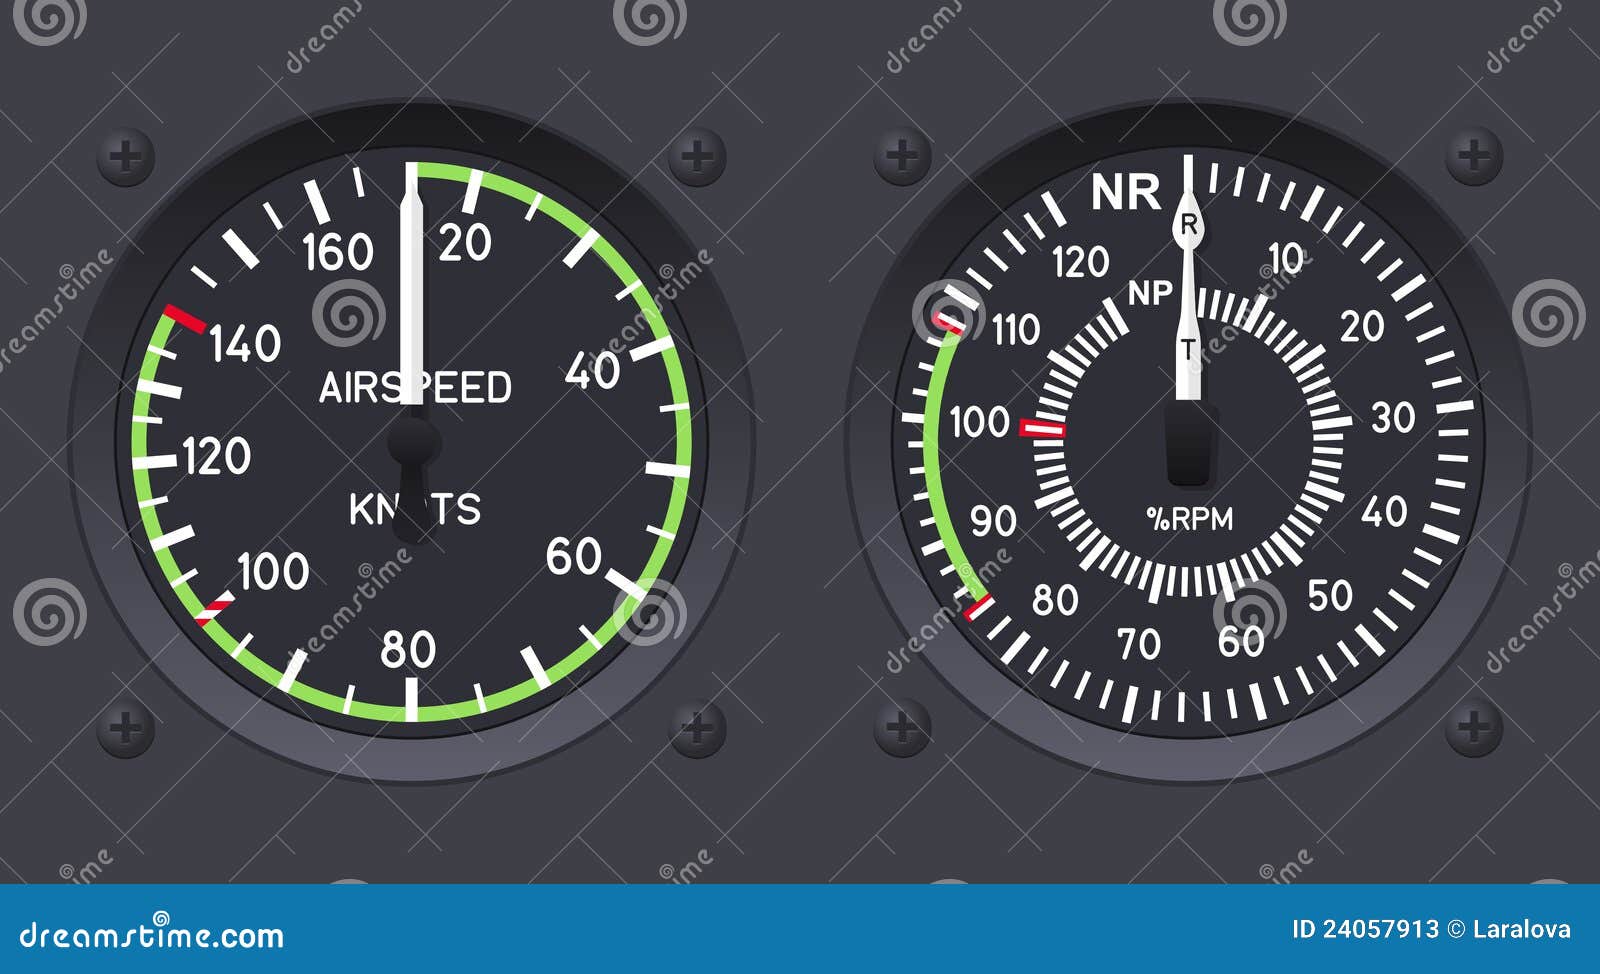 helicopter airspeed indicators